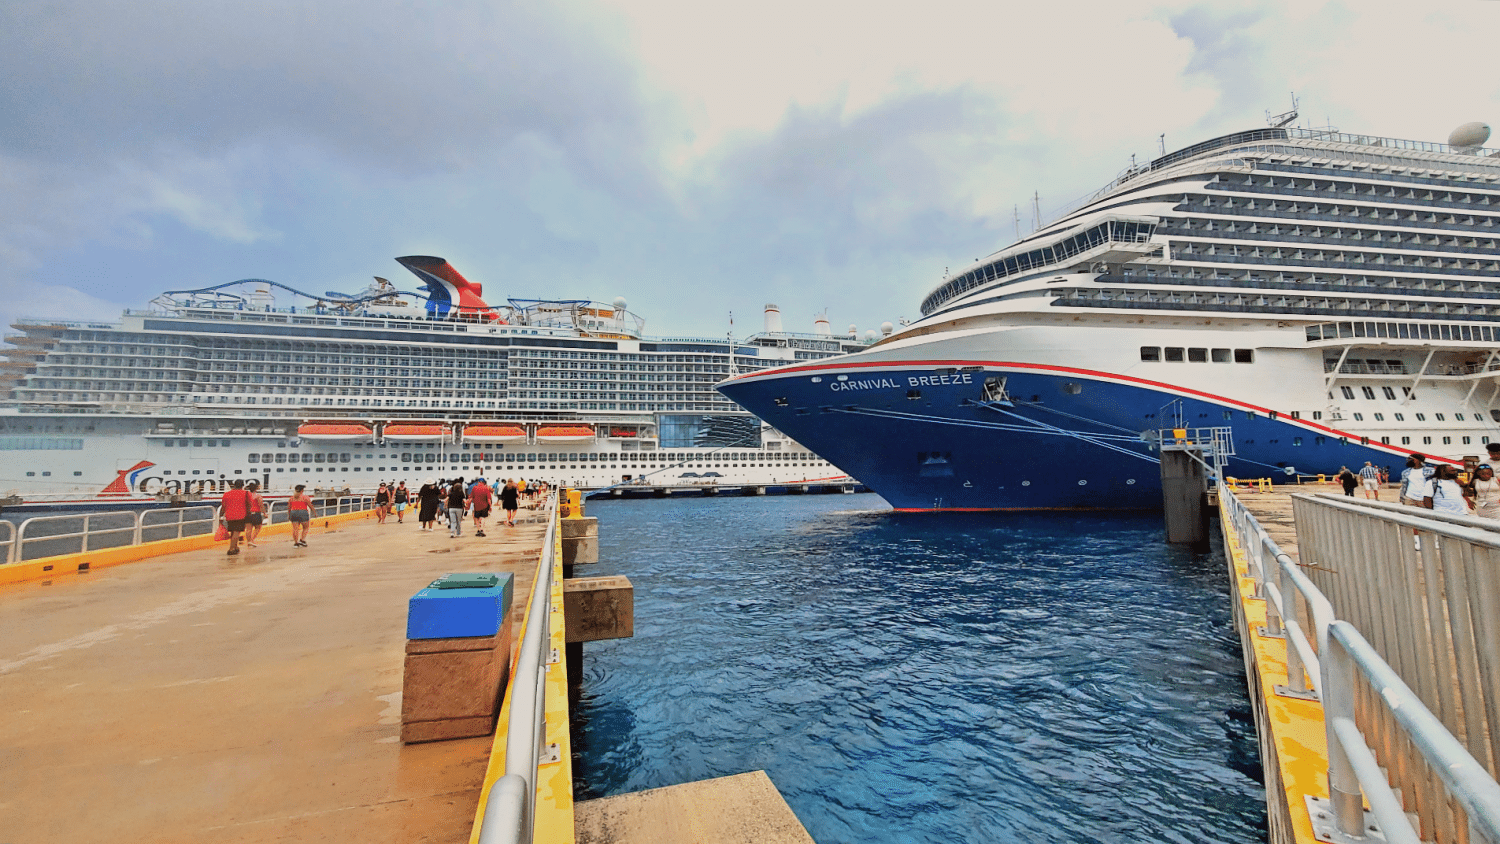 Two Carnival ships in port at Cozumel Mexico